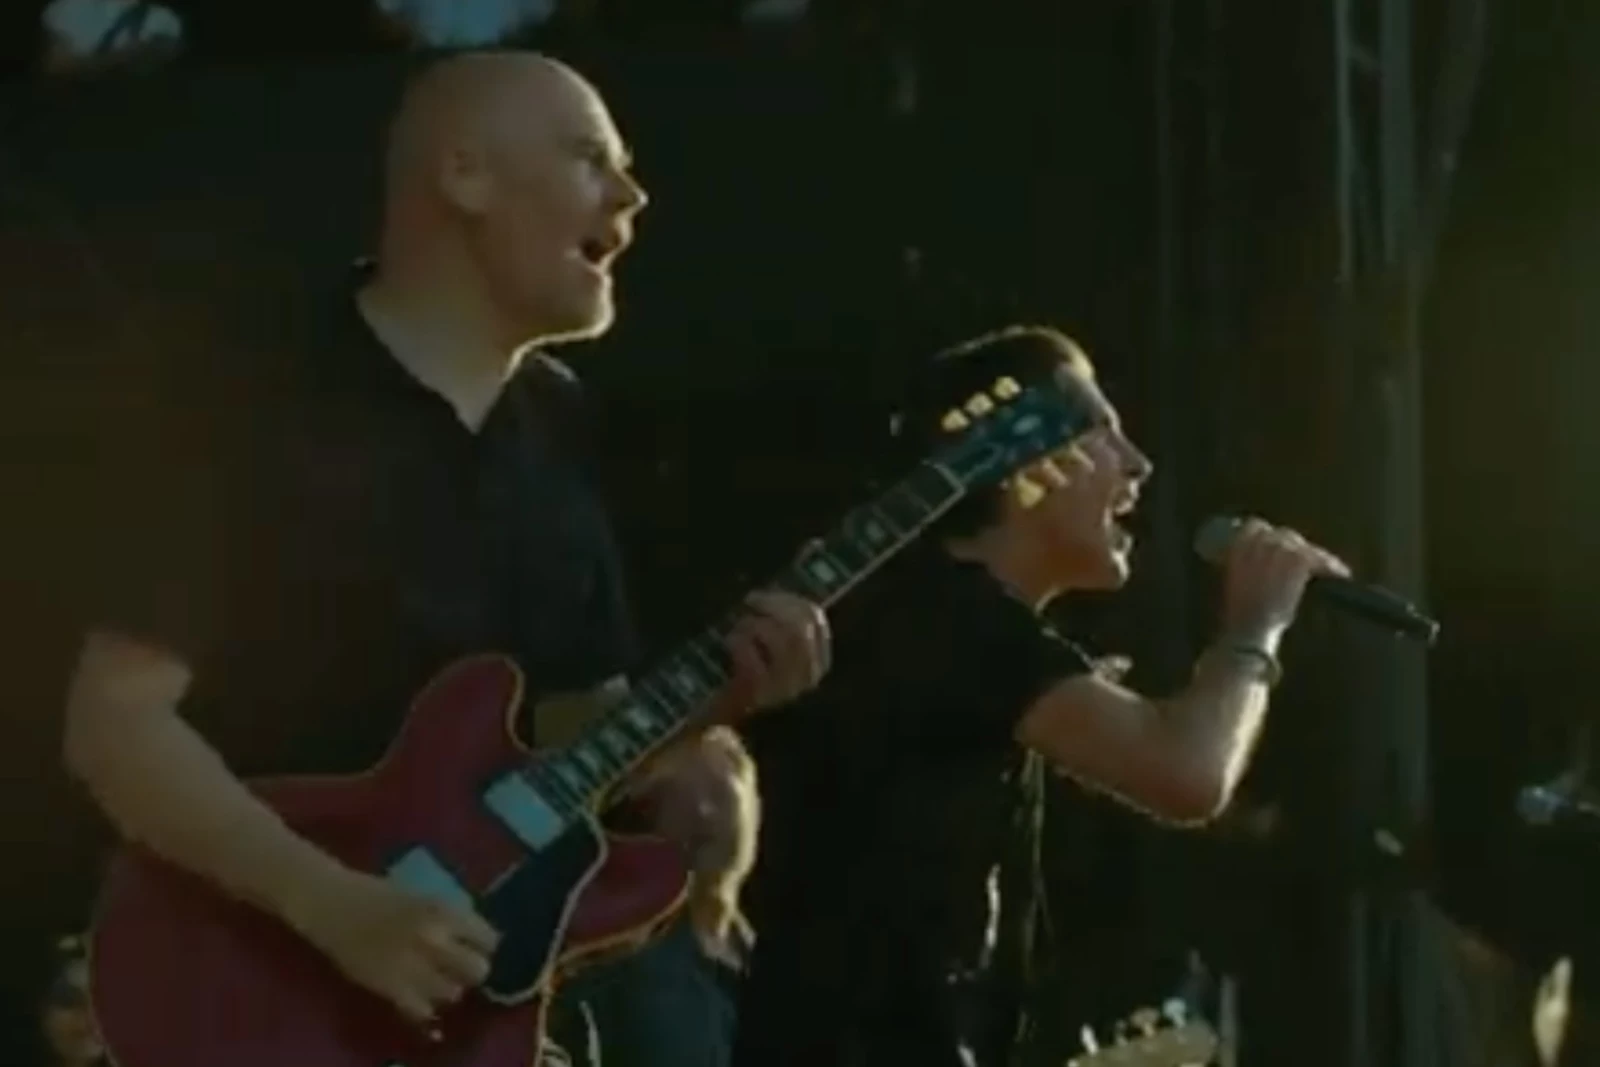 Watch Billy Corgan Join Porno for Pyros to Cover Led Zeppelin